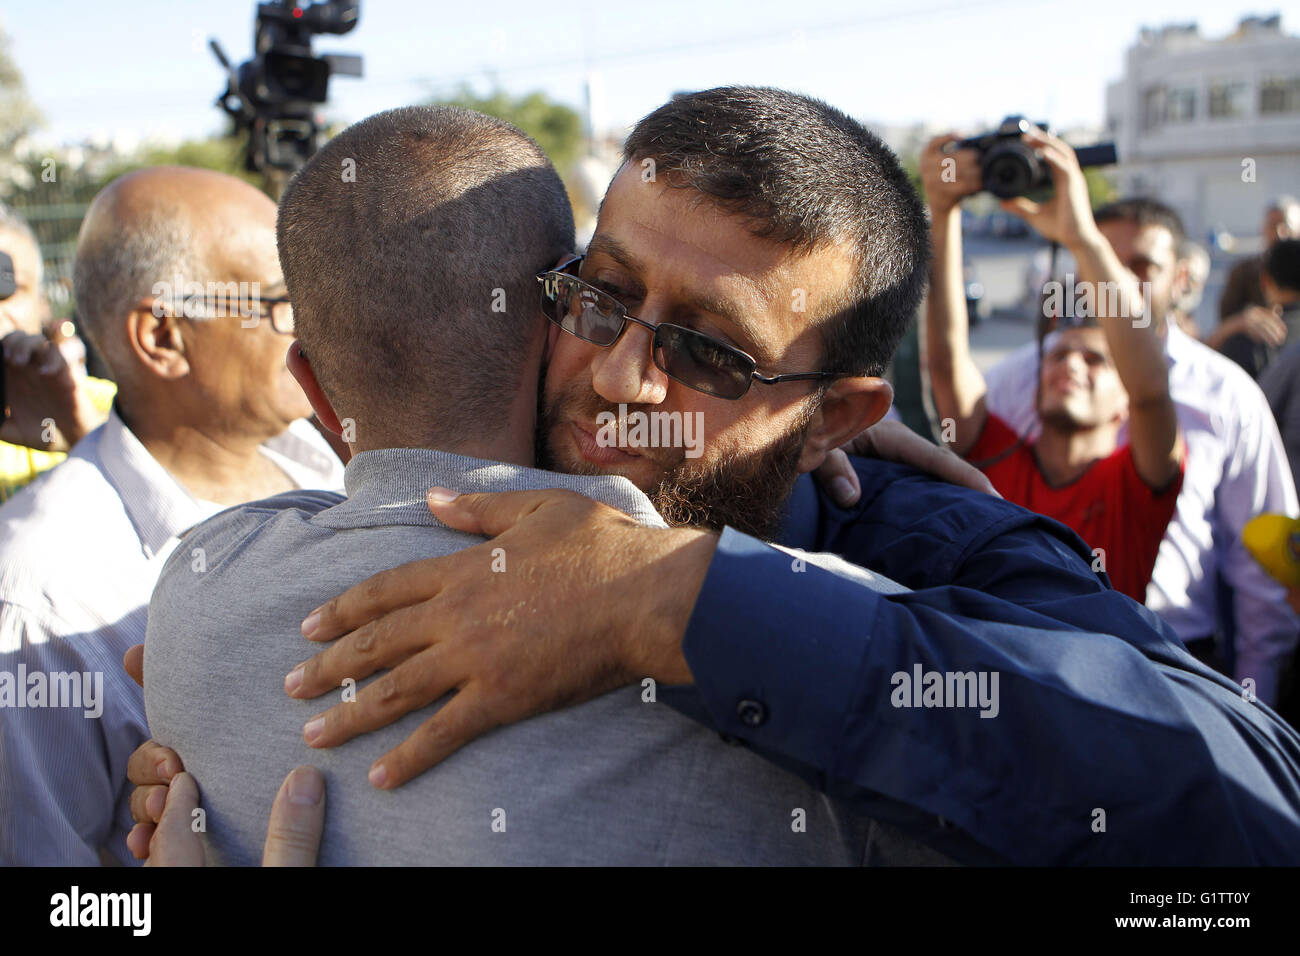 Hebron, West Bank, Palestinian Territory. 19th May, 2016. Palestinian imprisoned journalist, Mohammed al-Qiq hugs his father as he arrives in his village Dura, in southern West Bank after he was released from the Israeli Nafha Prison on May 19, 2016. Mohammed al-Qiq, 33, held by Israel without trial, agreed on February 26, 2016 to end his 94-day hunger strike under a deal for his release in May. Mohammed al-Qiq was released near the Jewish settlement of Beit Hagai, at the southern entrance to the occupied West Bank city of Hebron near his village (Credit Image: © Wisam Hashlamoun/APA Images v Stock Photo